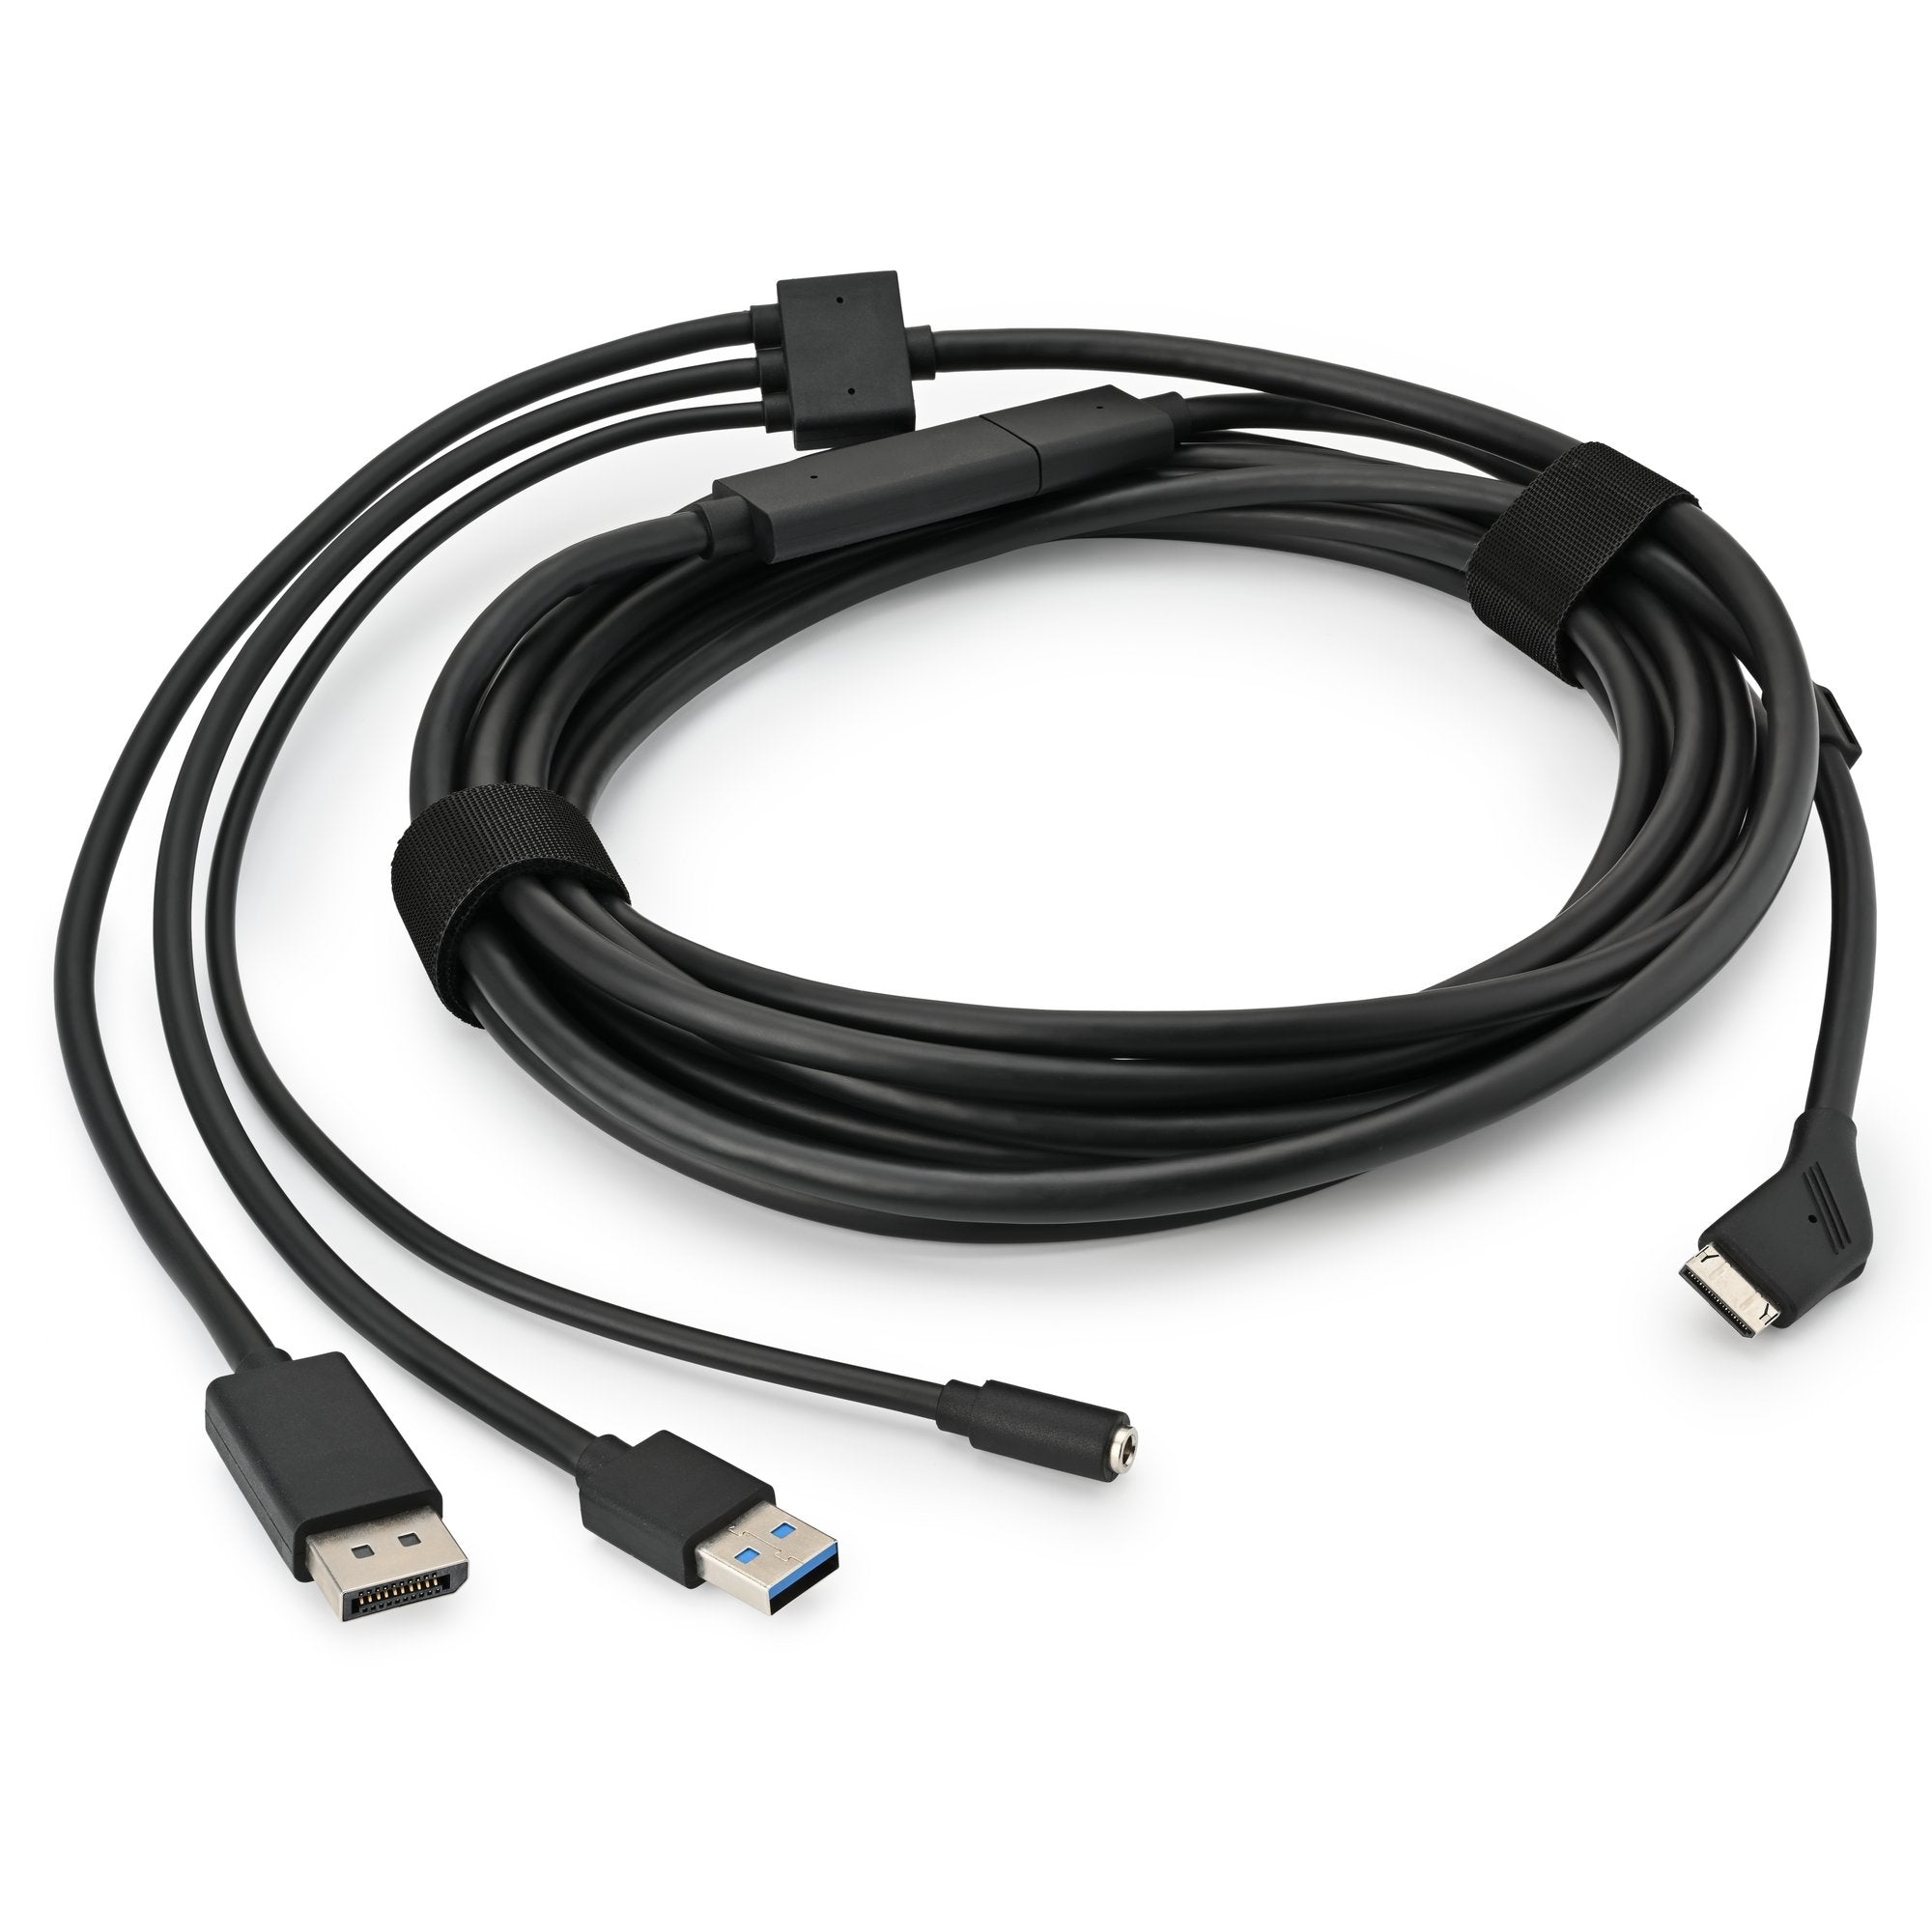 Valve Index Tether and Trident Cables